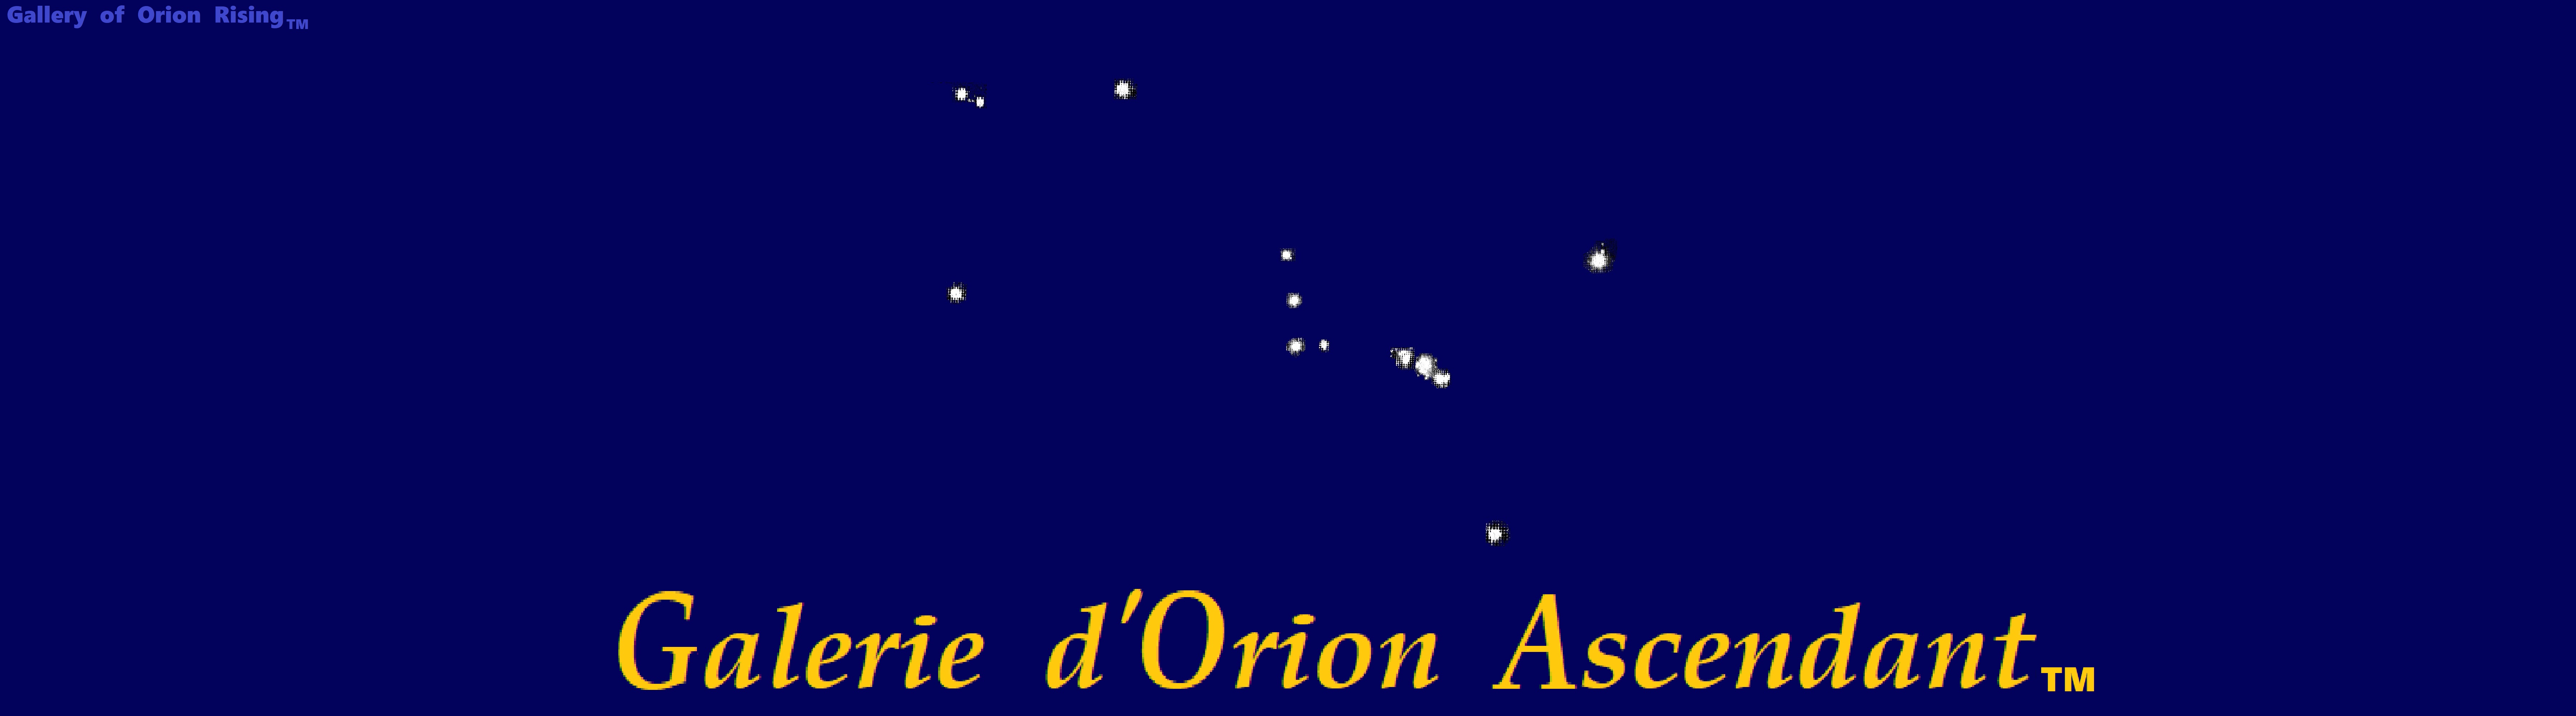 Graphic Image of Orion Rising Dark Blue